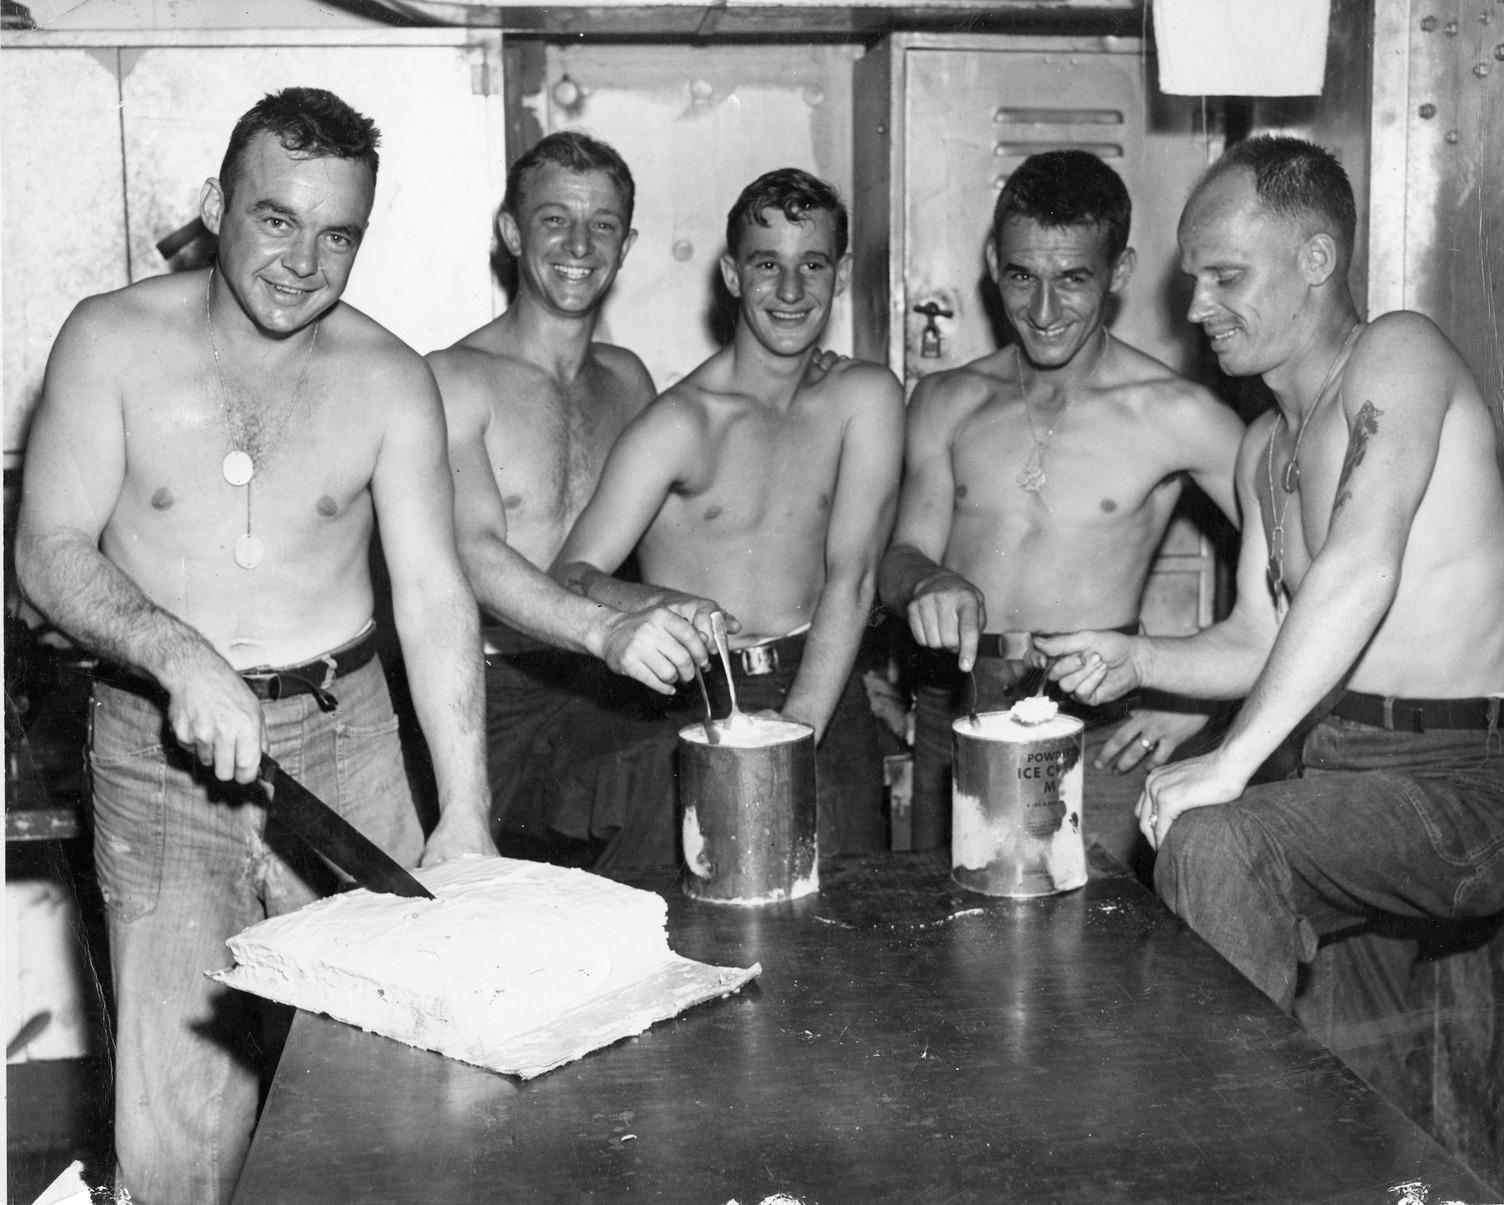 Sailors get ready to enjoy some ice cream and cake